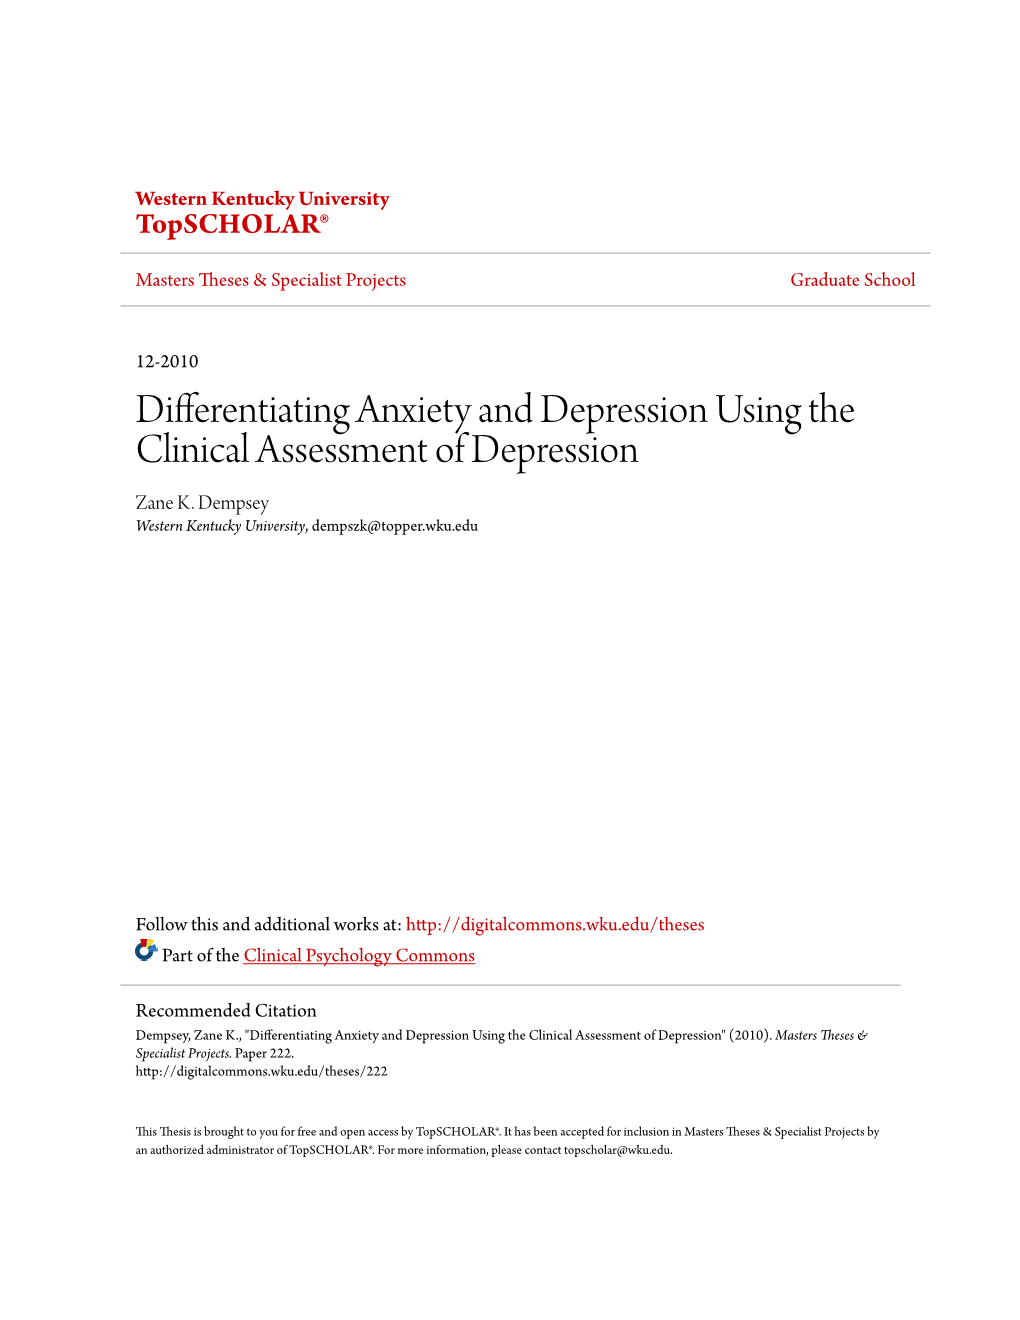 Differentiating Anxiety and Depression Using the Clinical Assessment of Depression Zane K